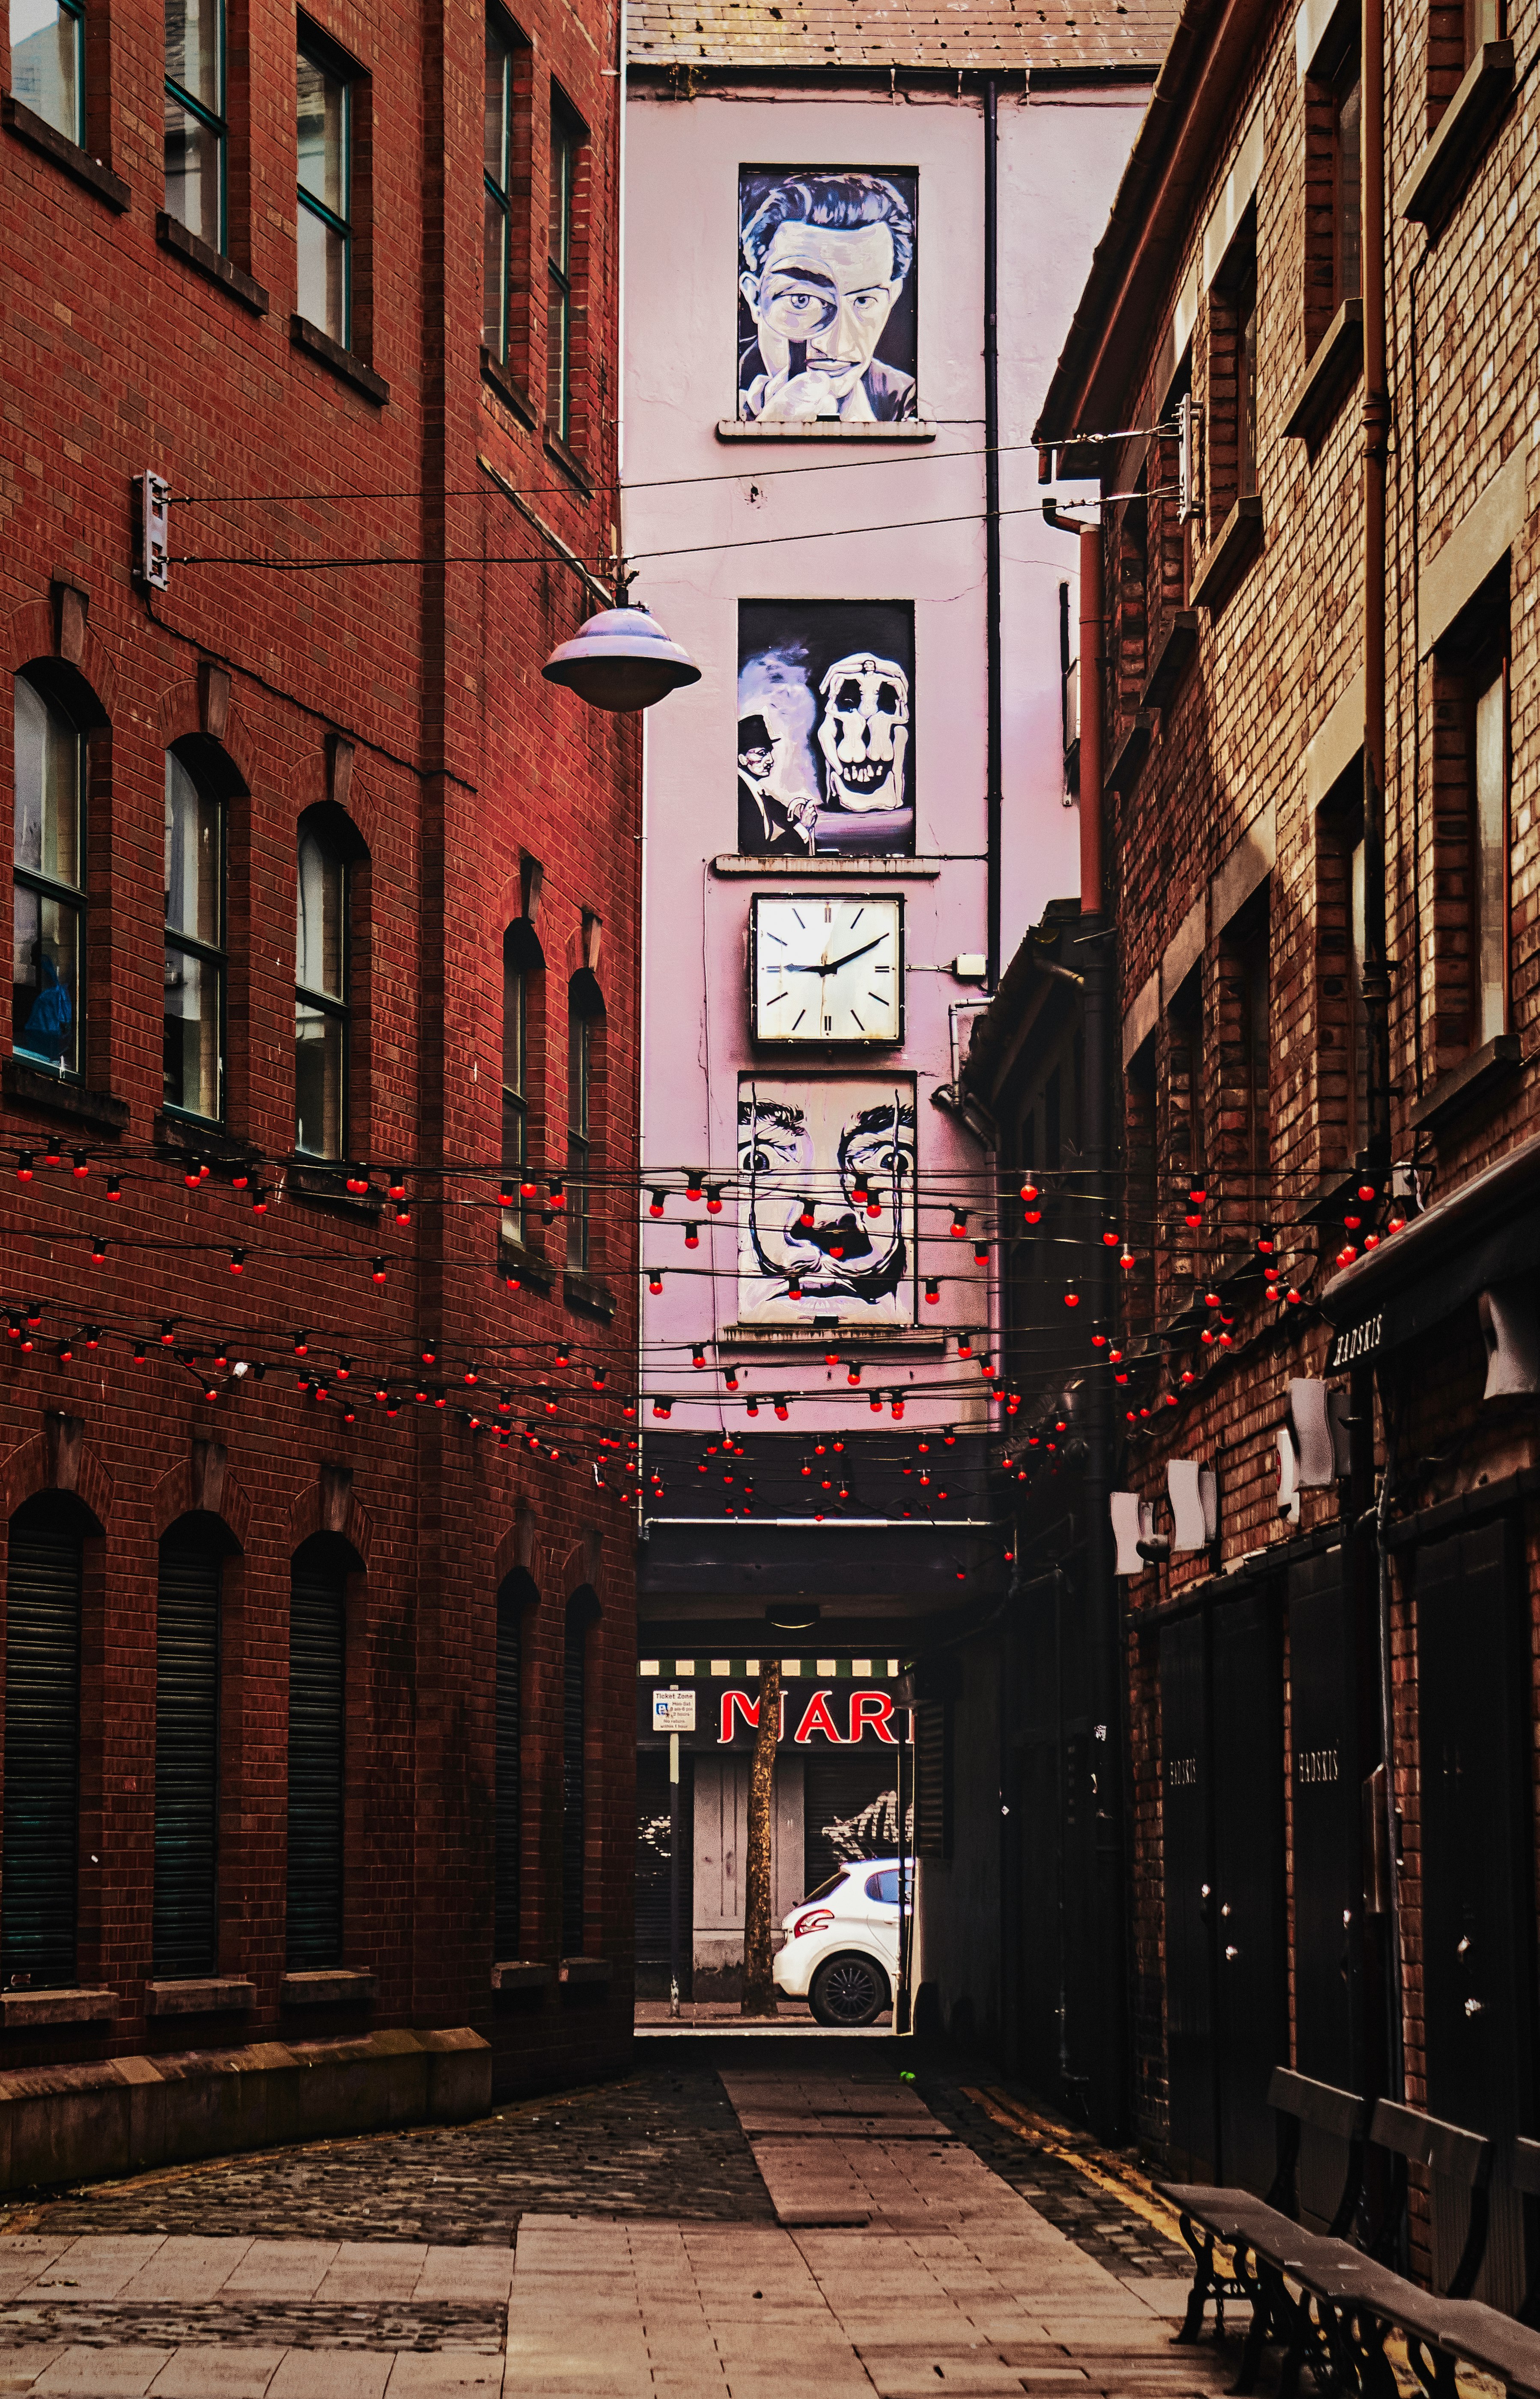 Décor above the Commercial Court Entry near the Duke of York in Belfast's Cathedral Quarter (Apr. 2020).